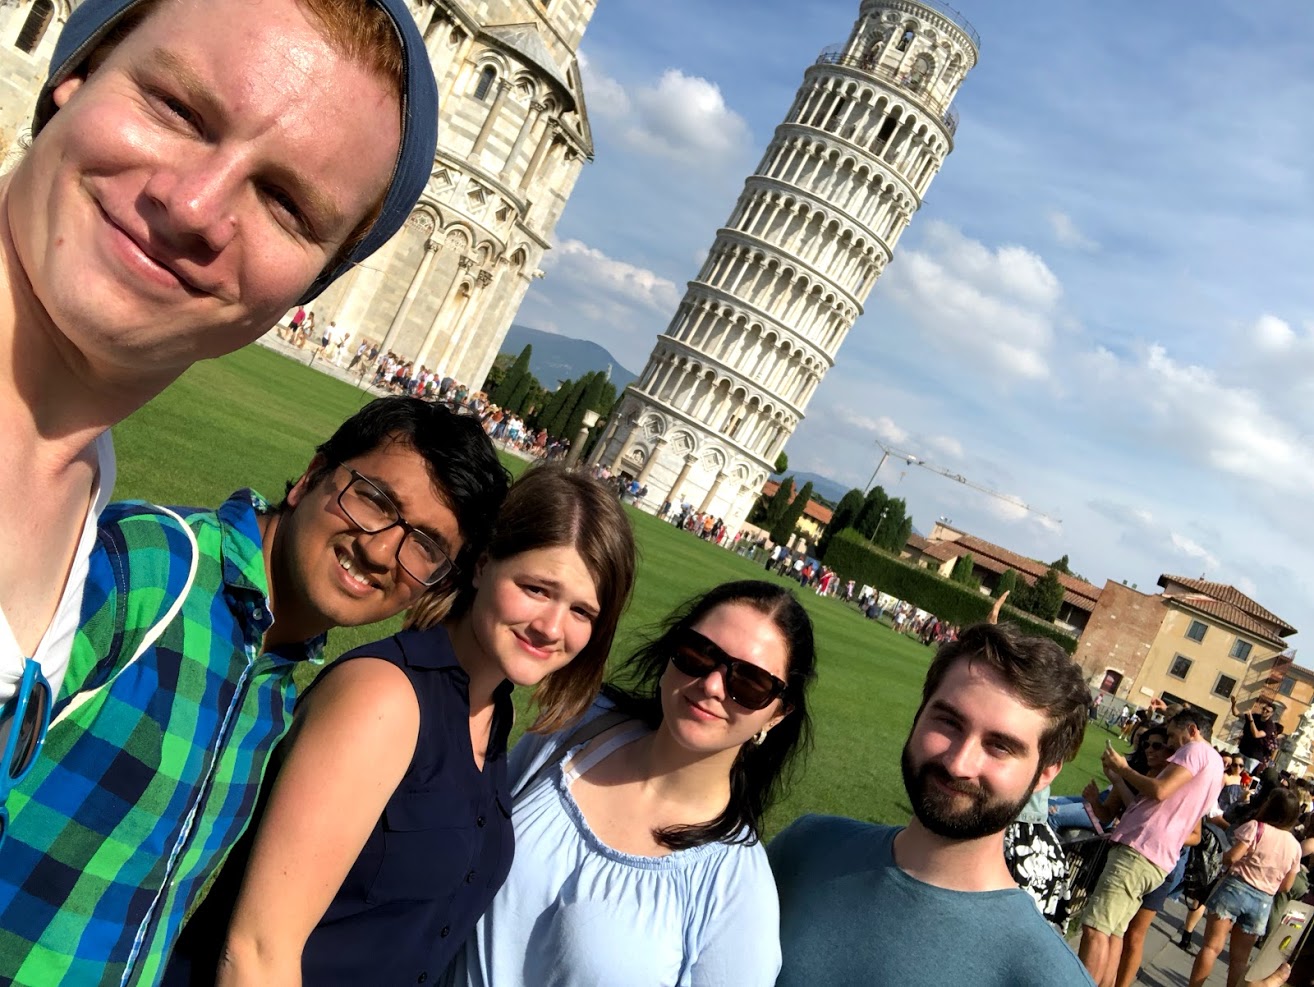 At the Leaning Tower of Pisa